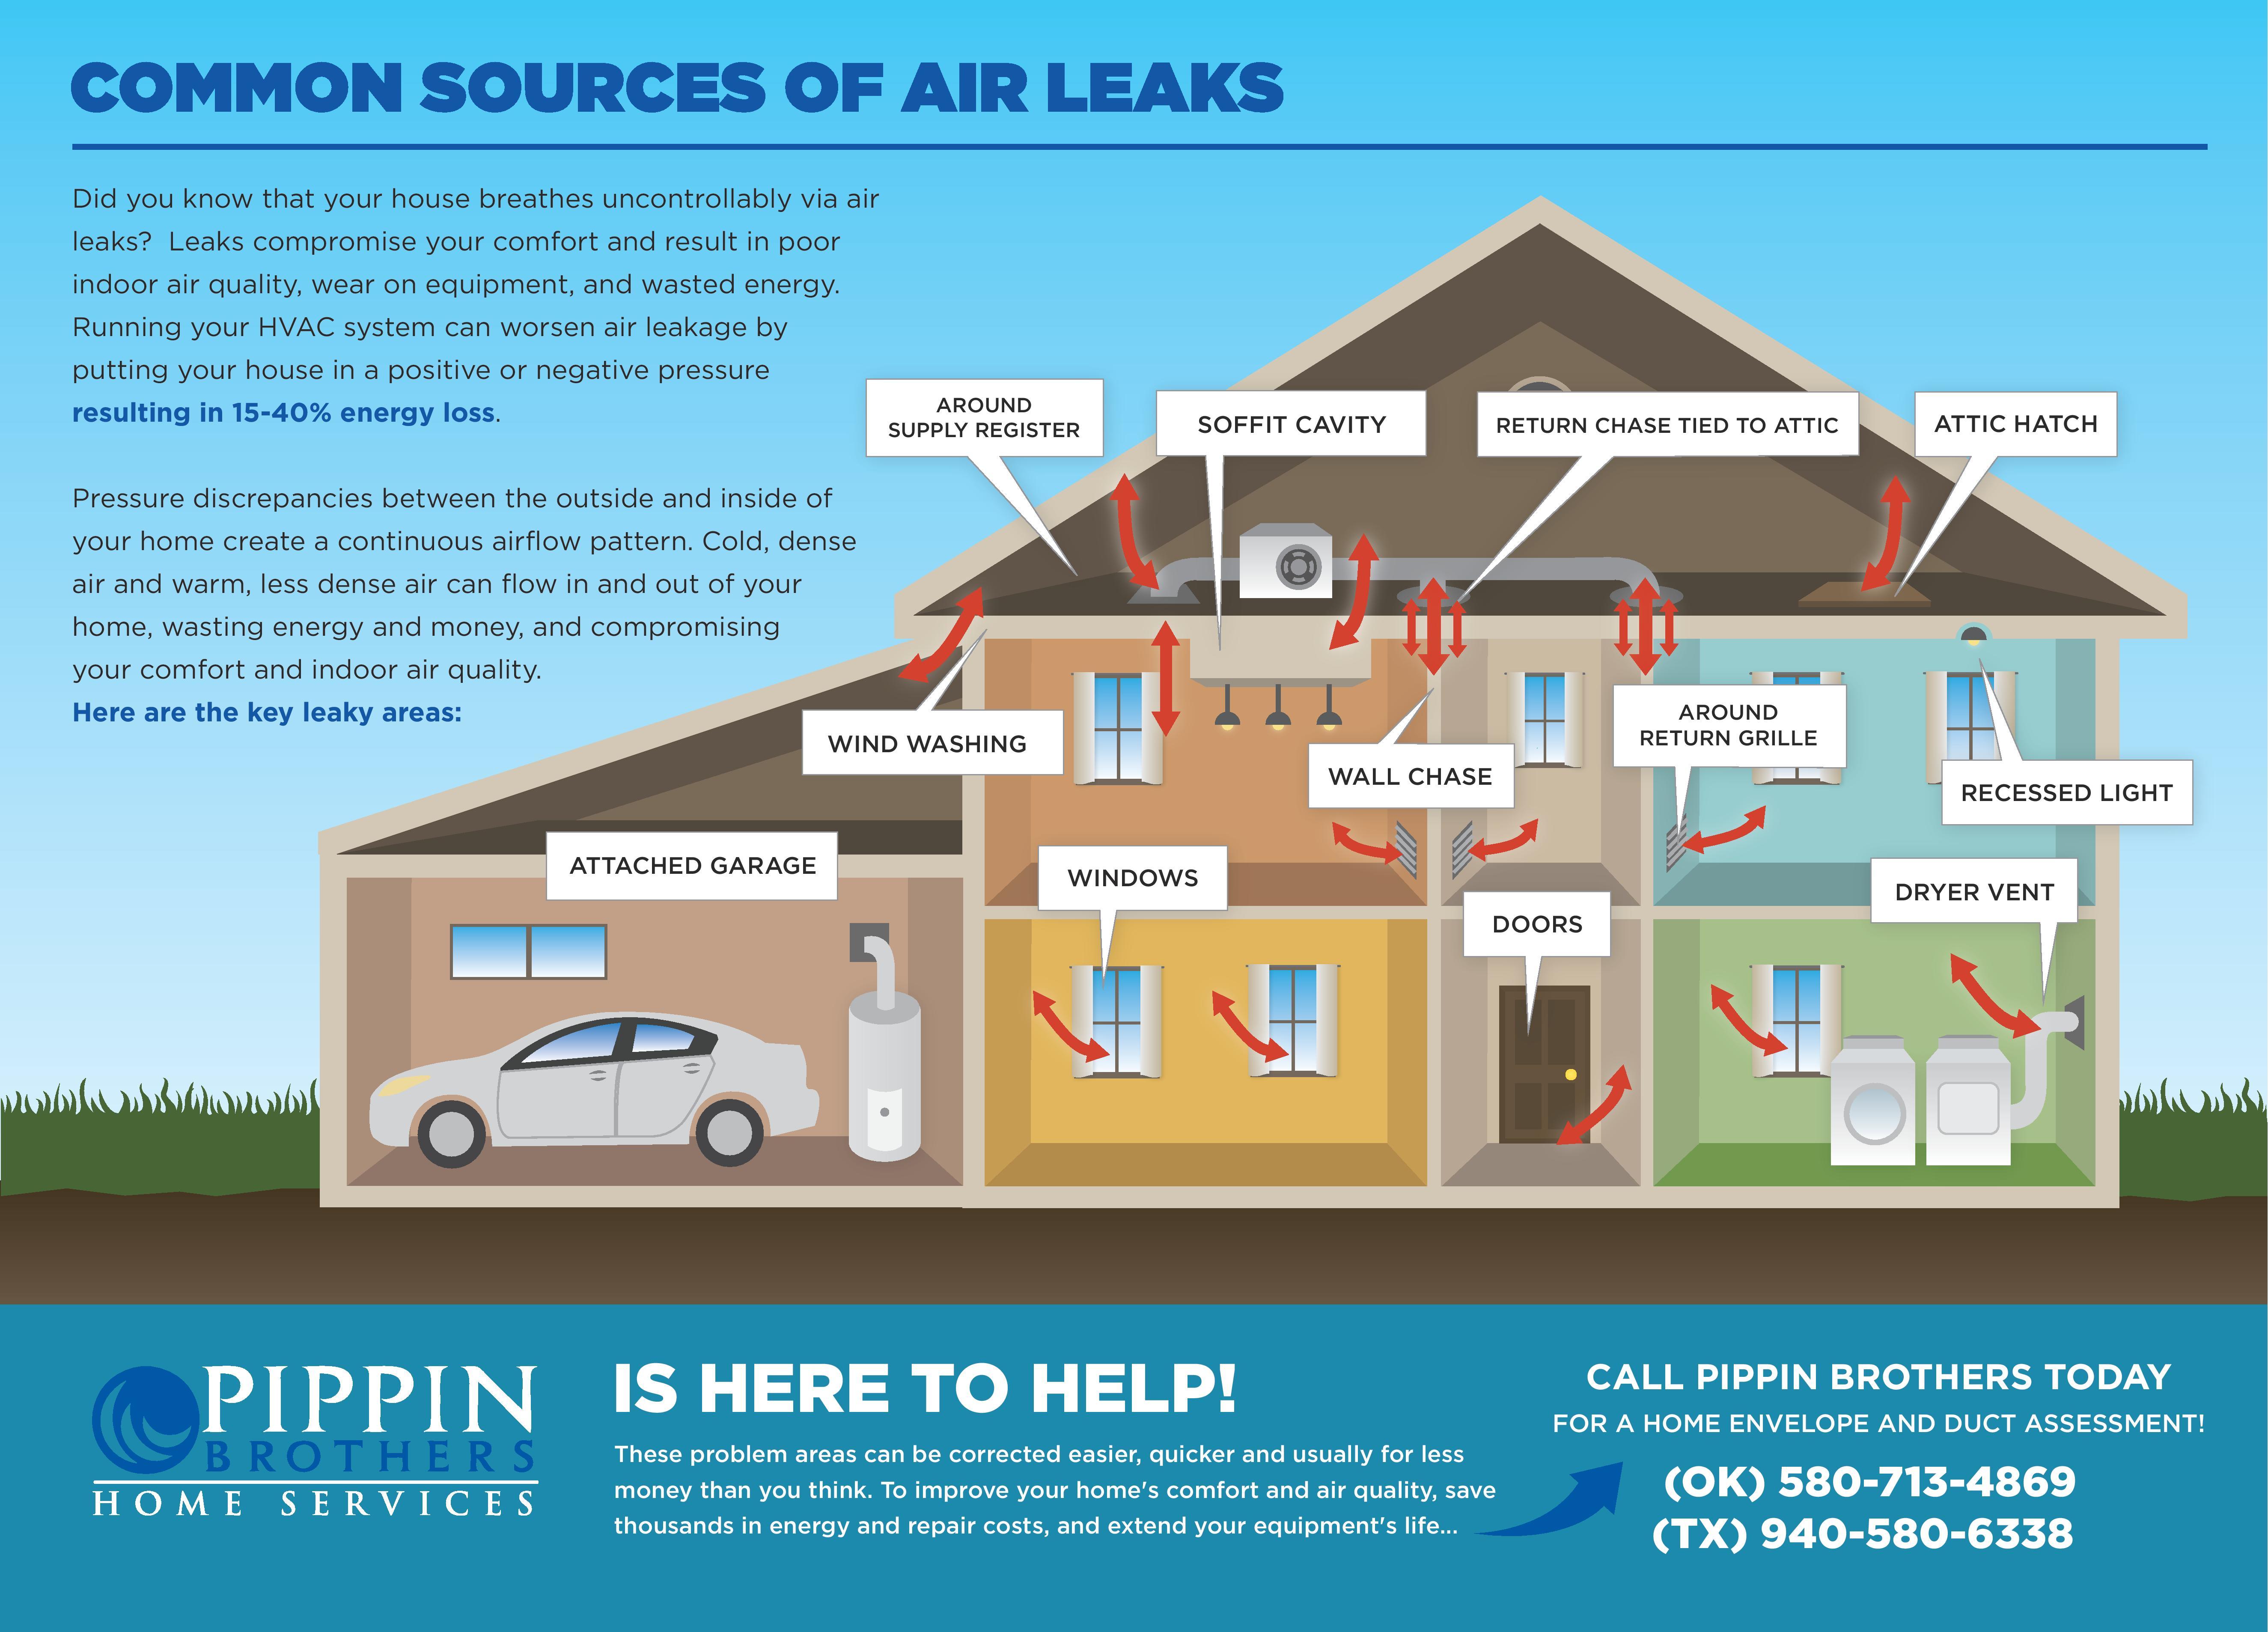 common sources of air leaks in the home, typical in lawton okalhoma